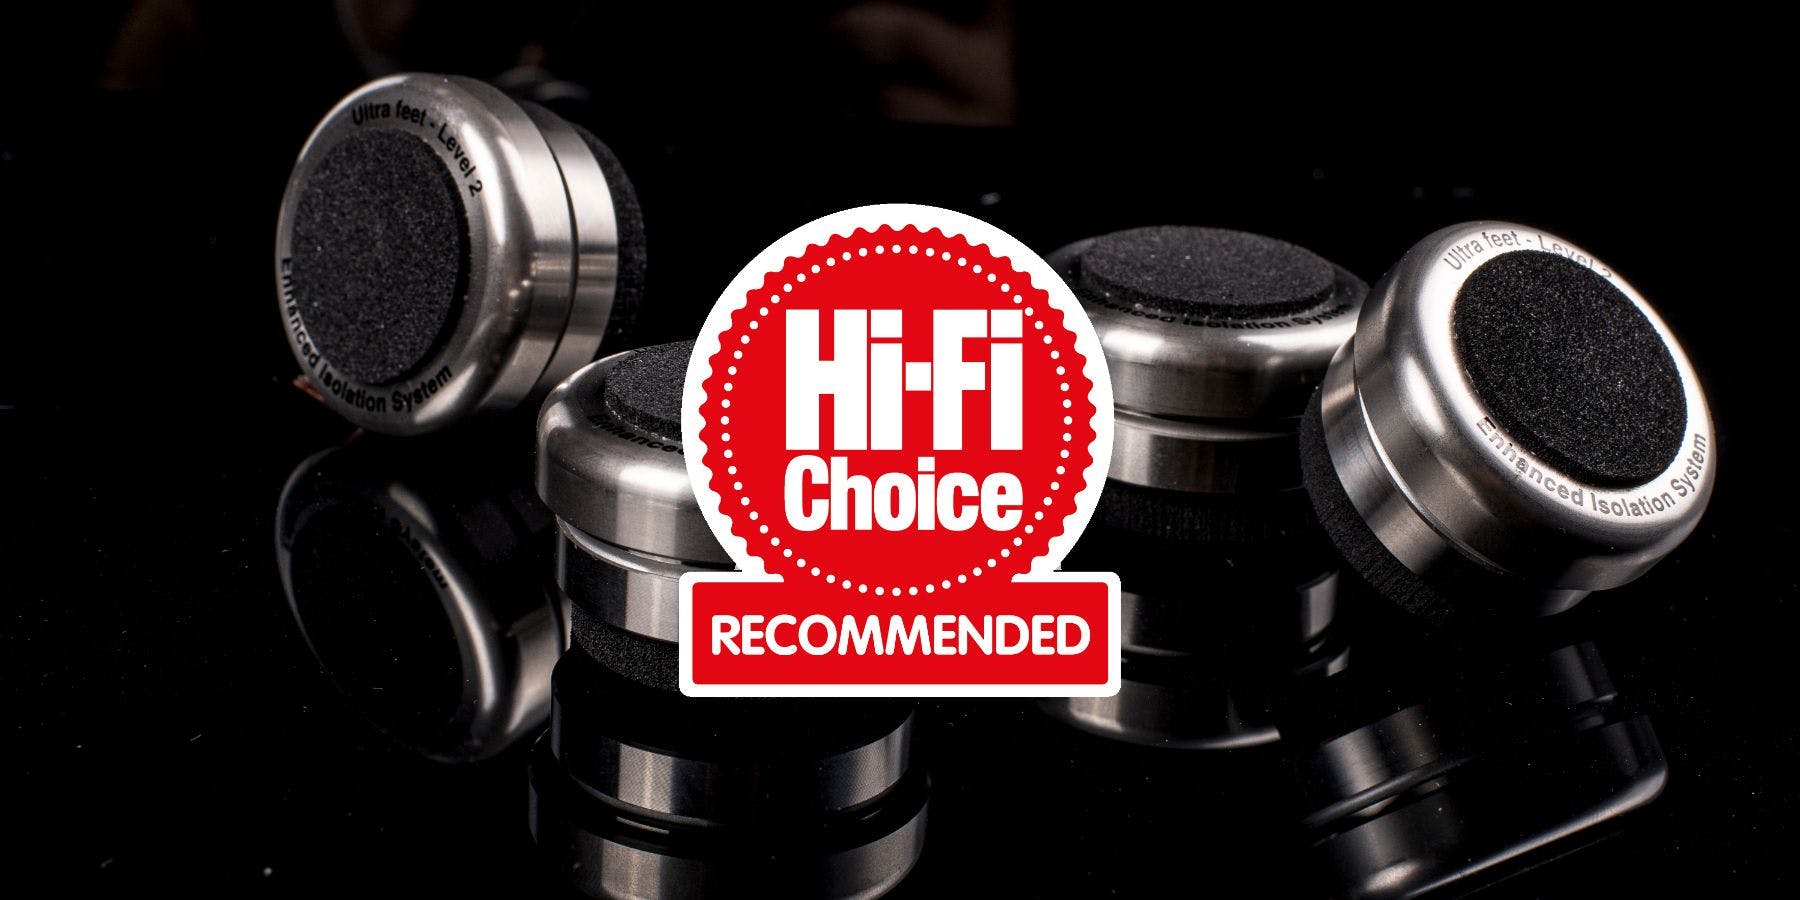 Bassocontinuo Ultra Feet (Level 2) awarded a 'Recommended' badge from Hi-Fi Choice